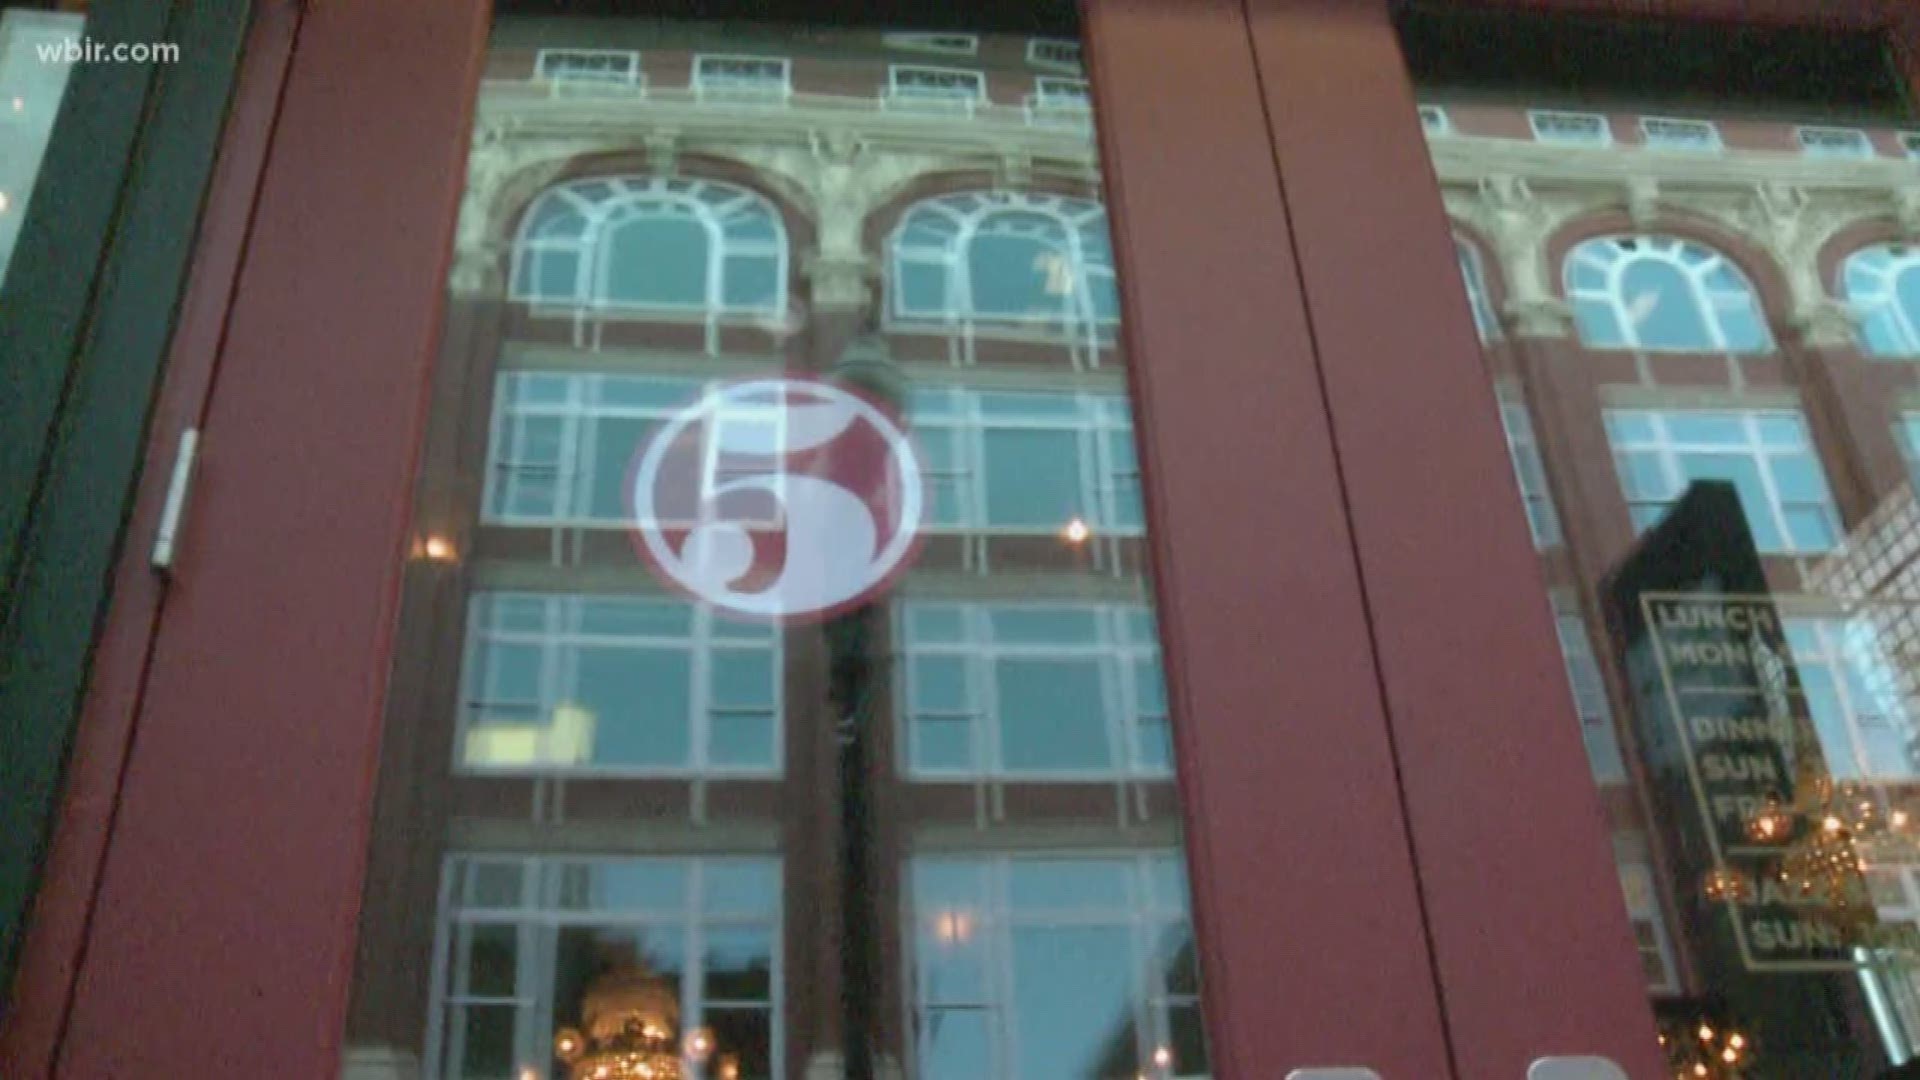 FIVE Knoxville Bar and Restaurant will close its Gay Street location at the end of March.